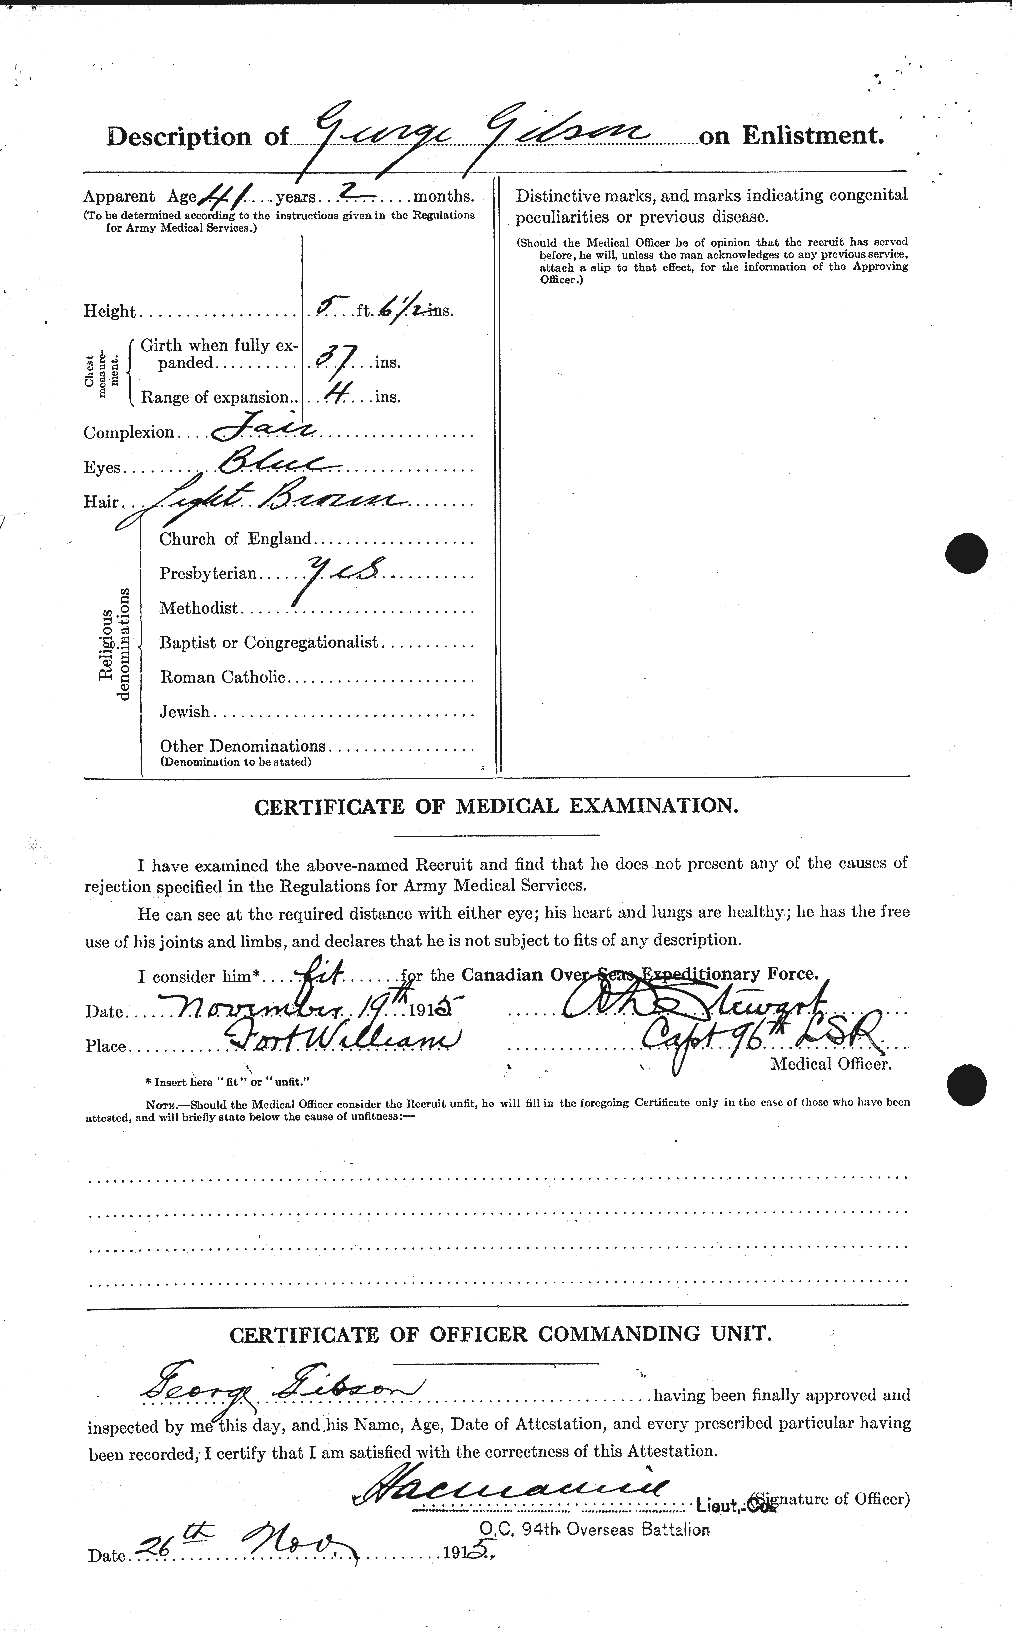 Personnel Records of the First World War - CEF 348467b